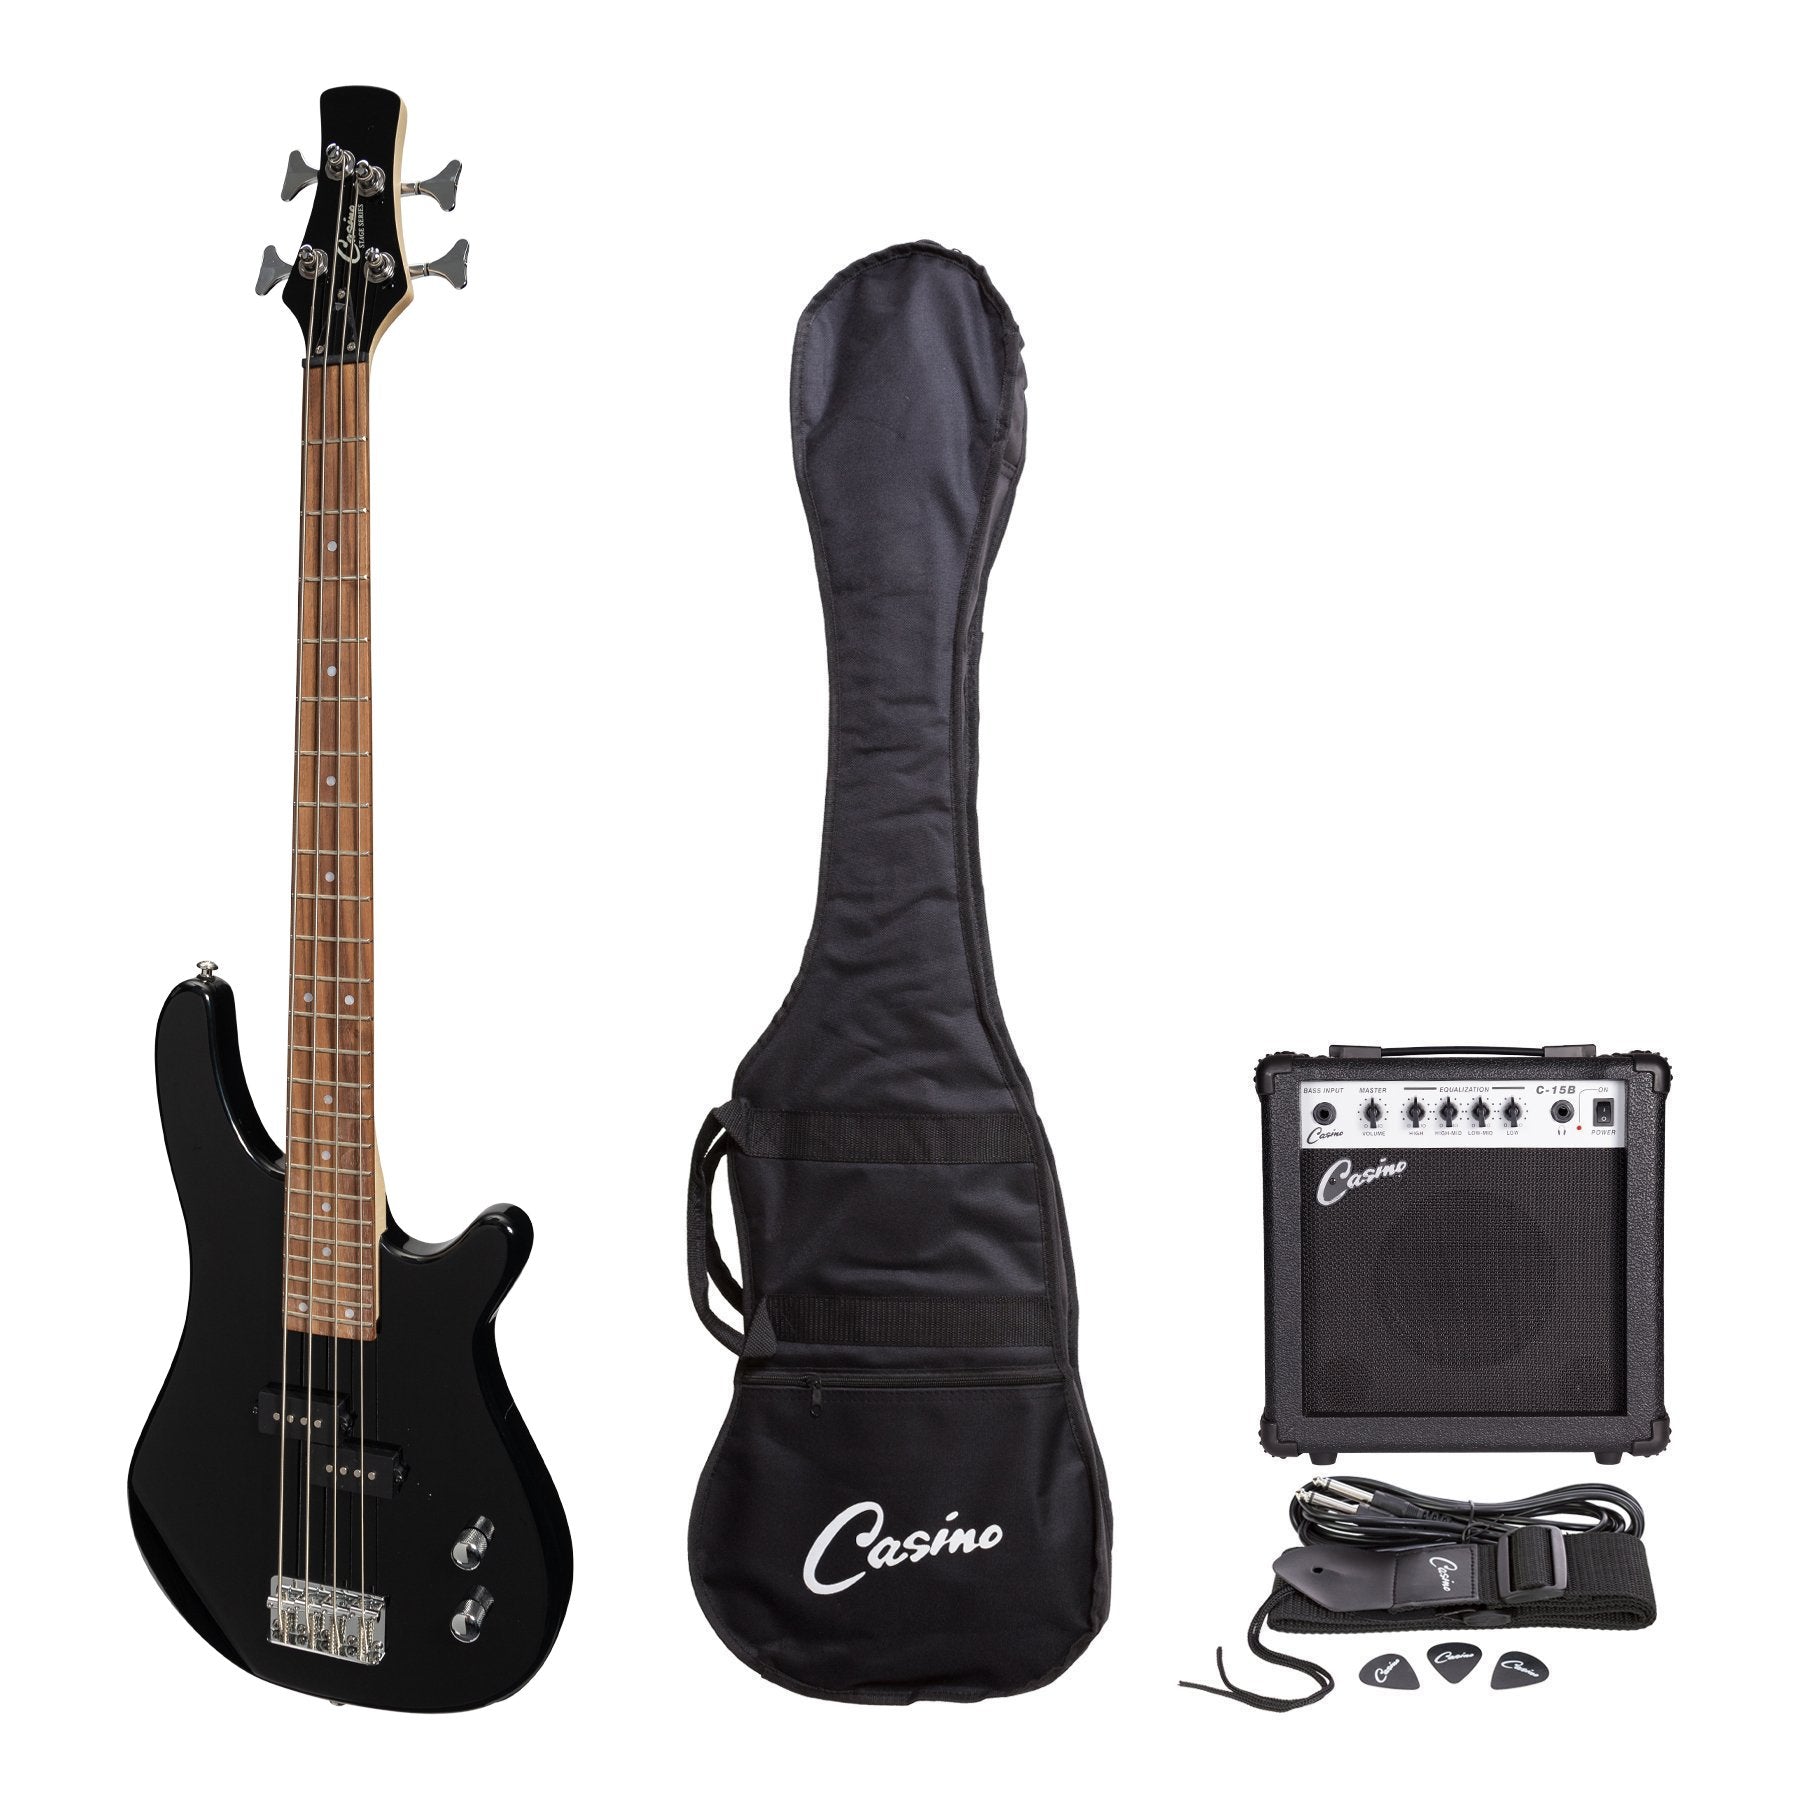 Casino '24 Series' Short Scale Tune-Style Electric Bass Guitar and 15 Watt Amplifier Pack (Black)-CP-SB1-BLK